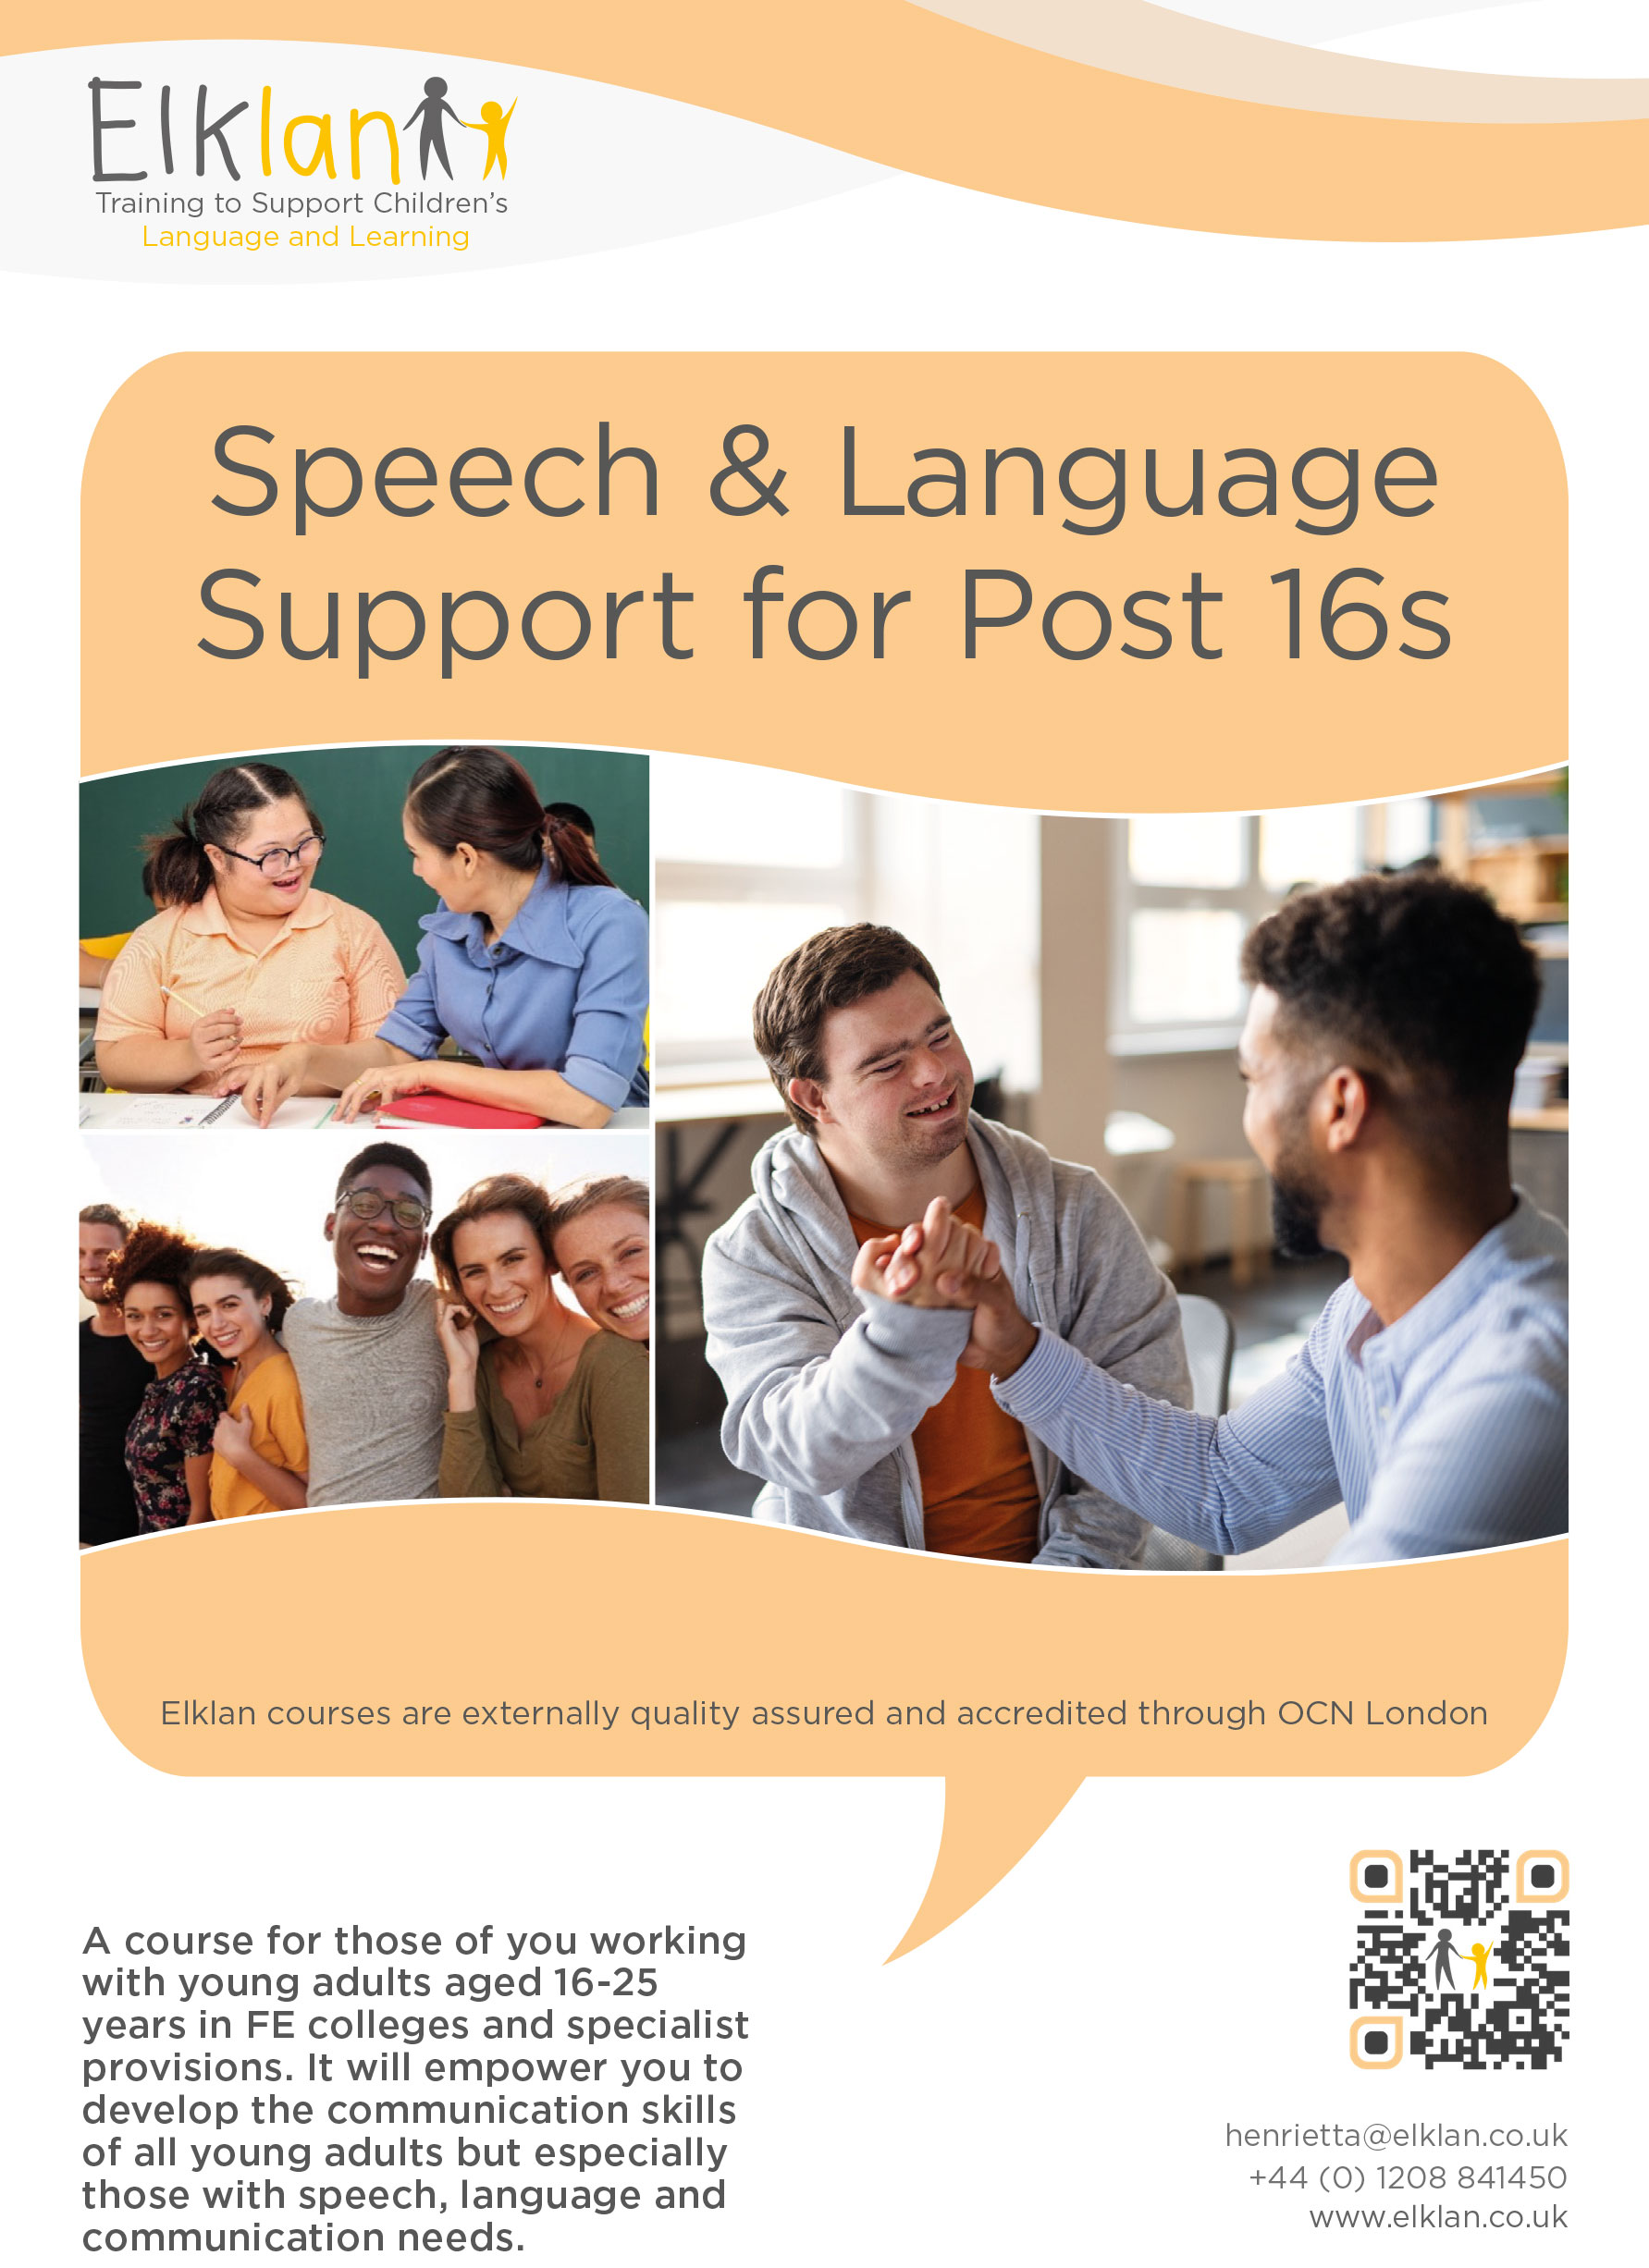 Speech and Language Support for Post 16s flyer - 100 copies